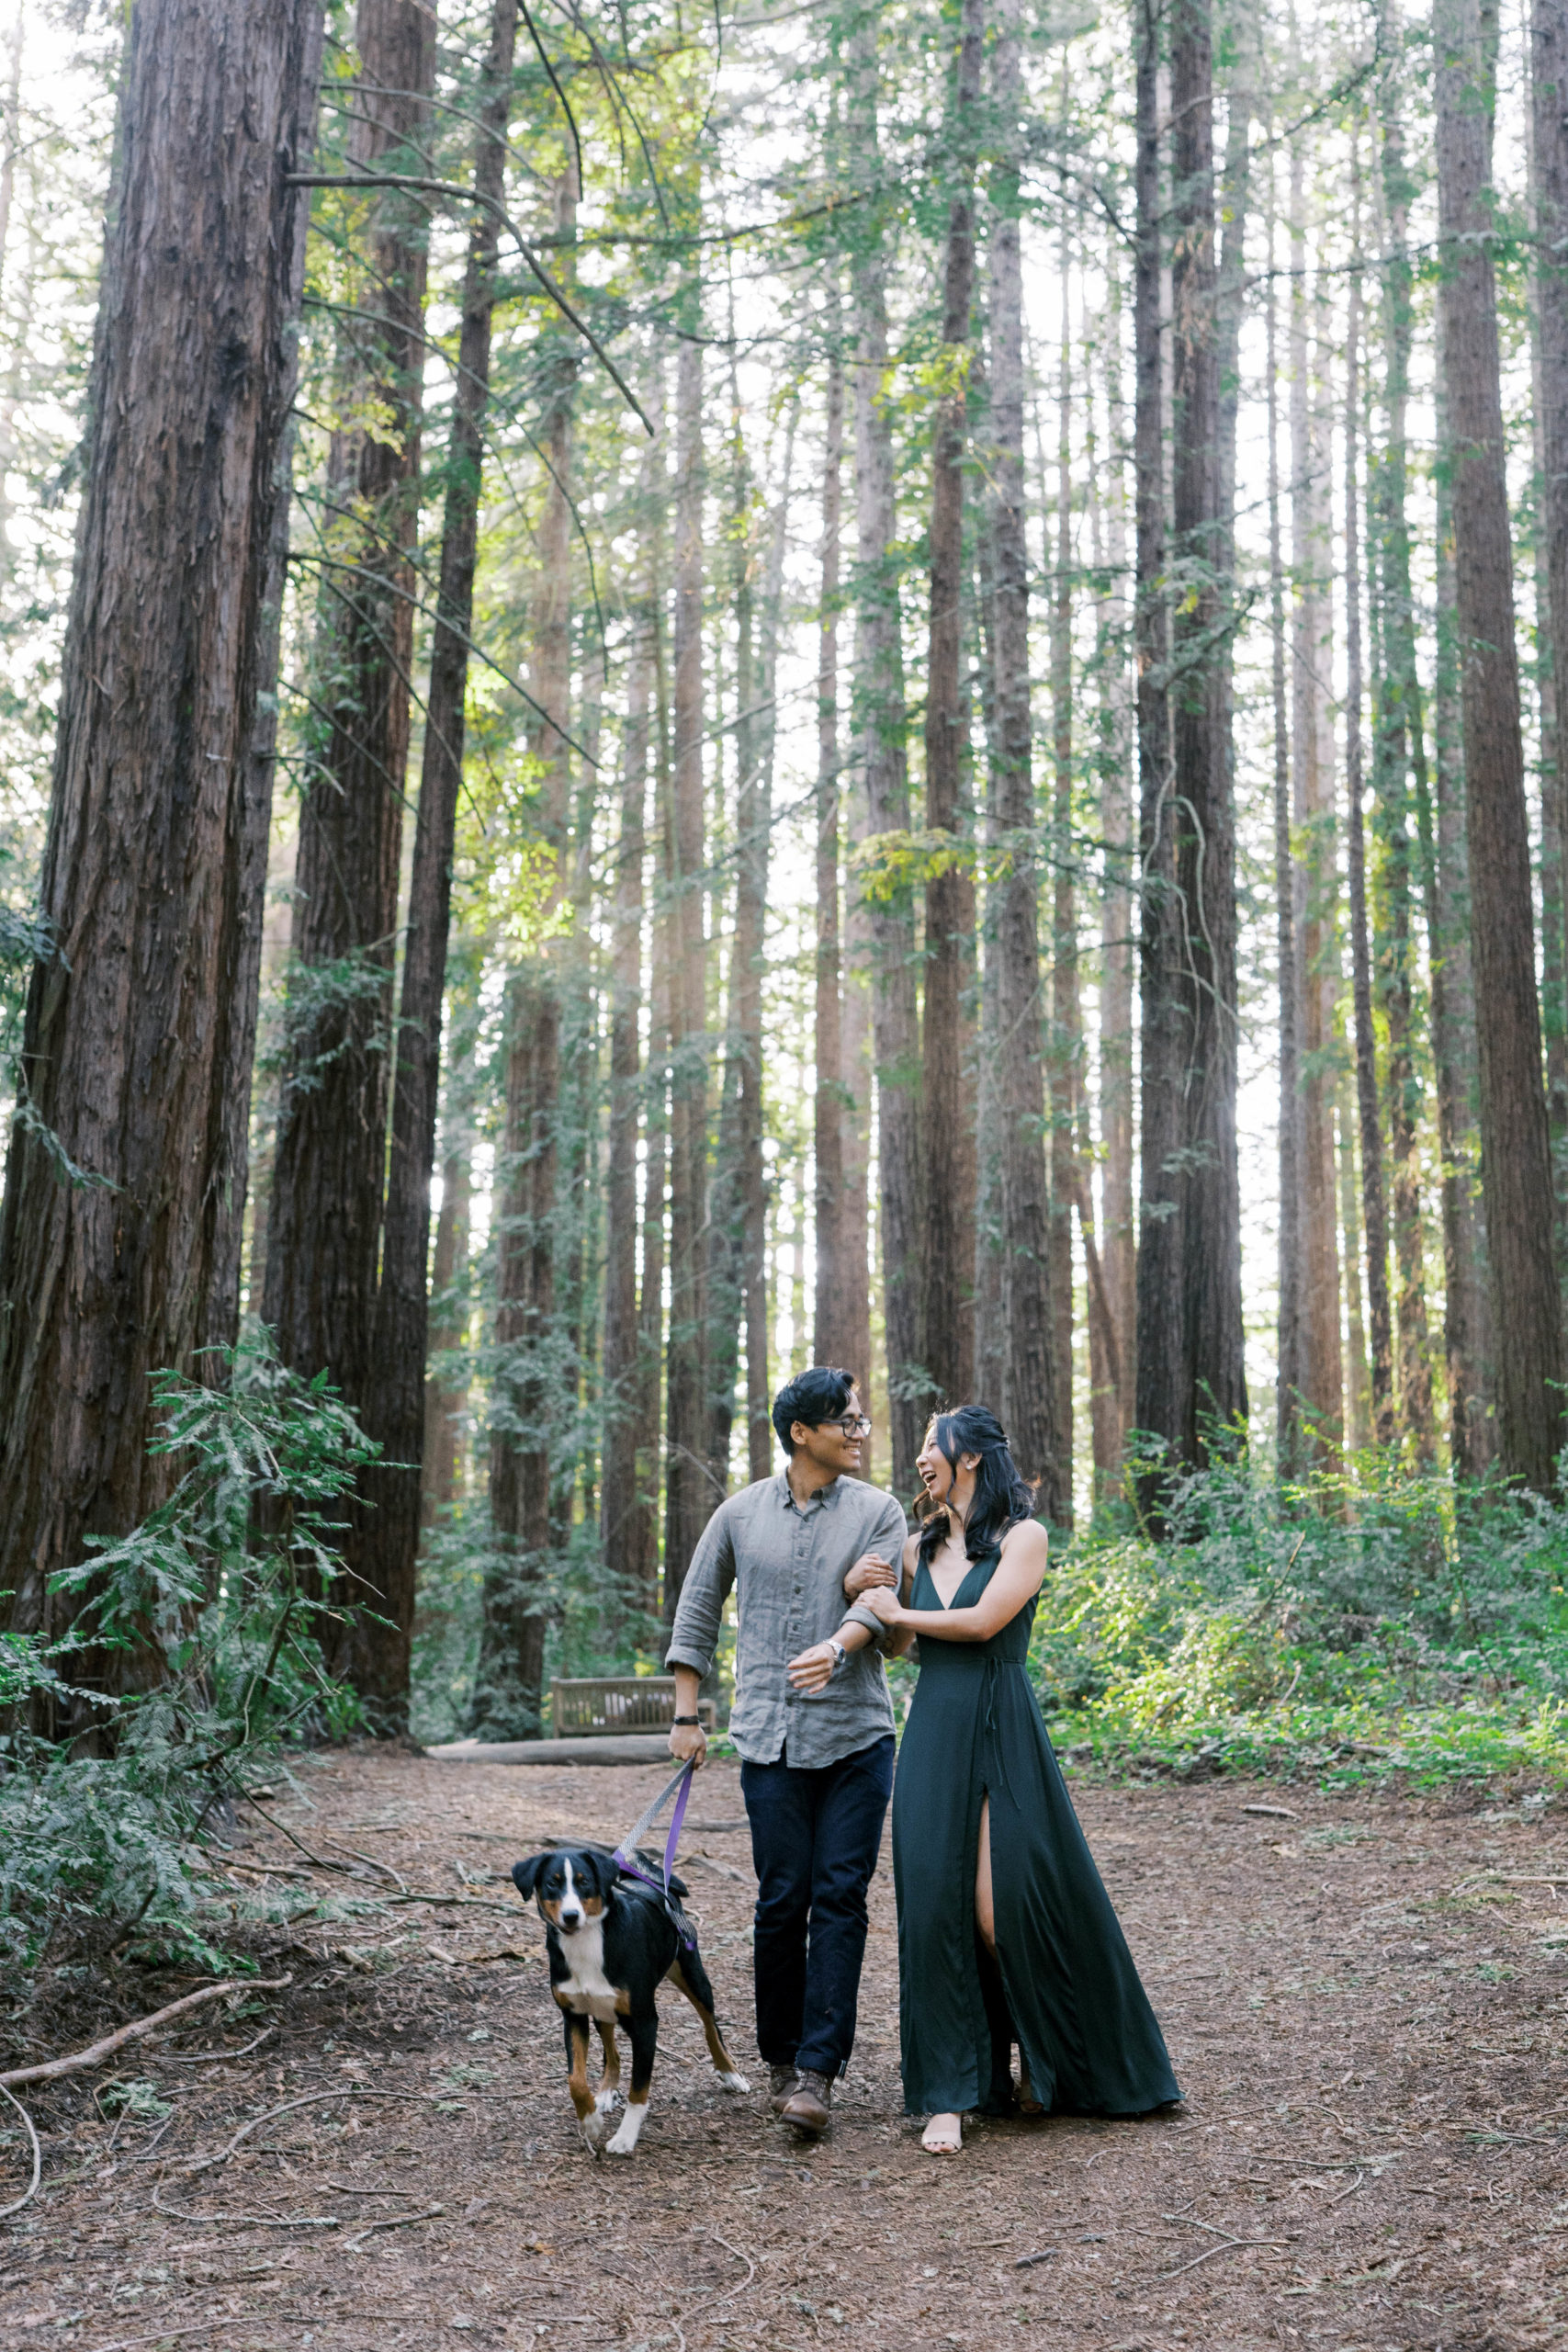 family with dog candid photo in forest